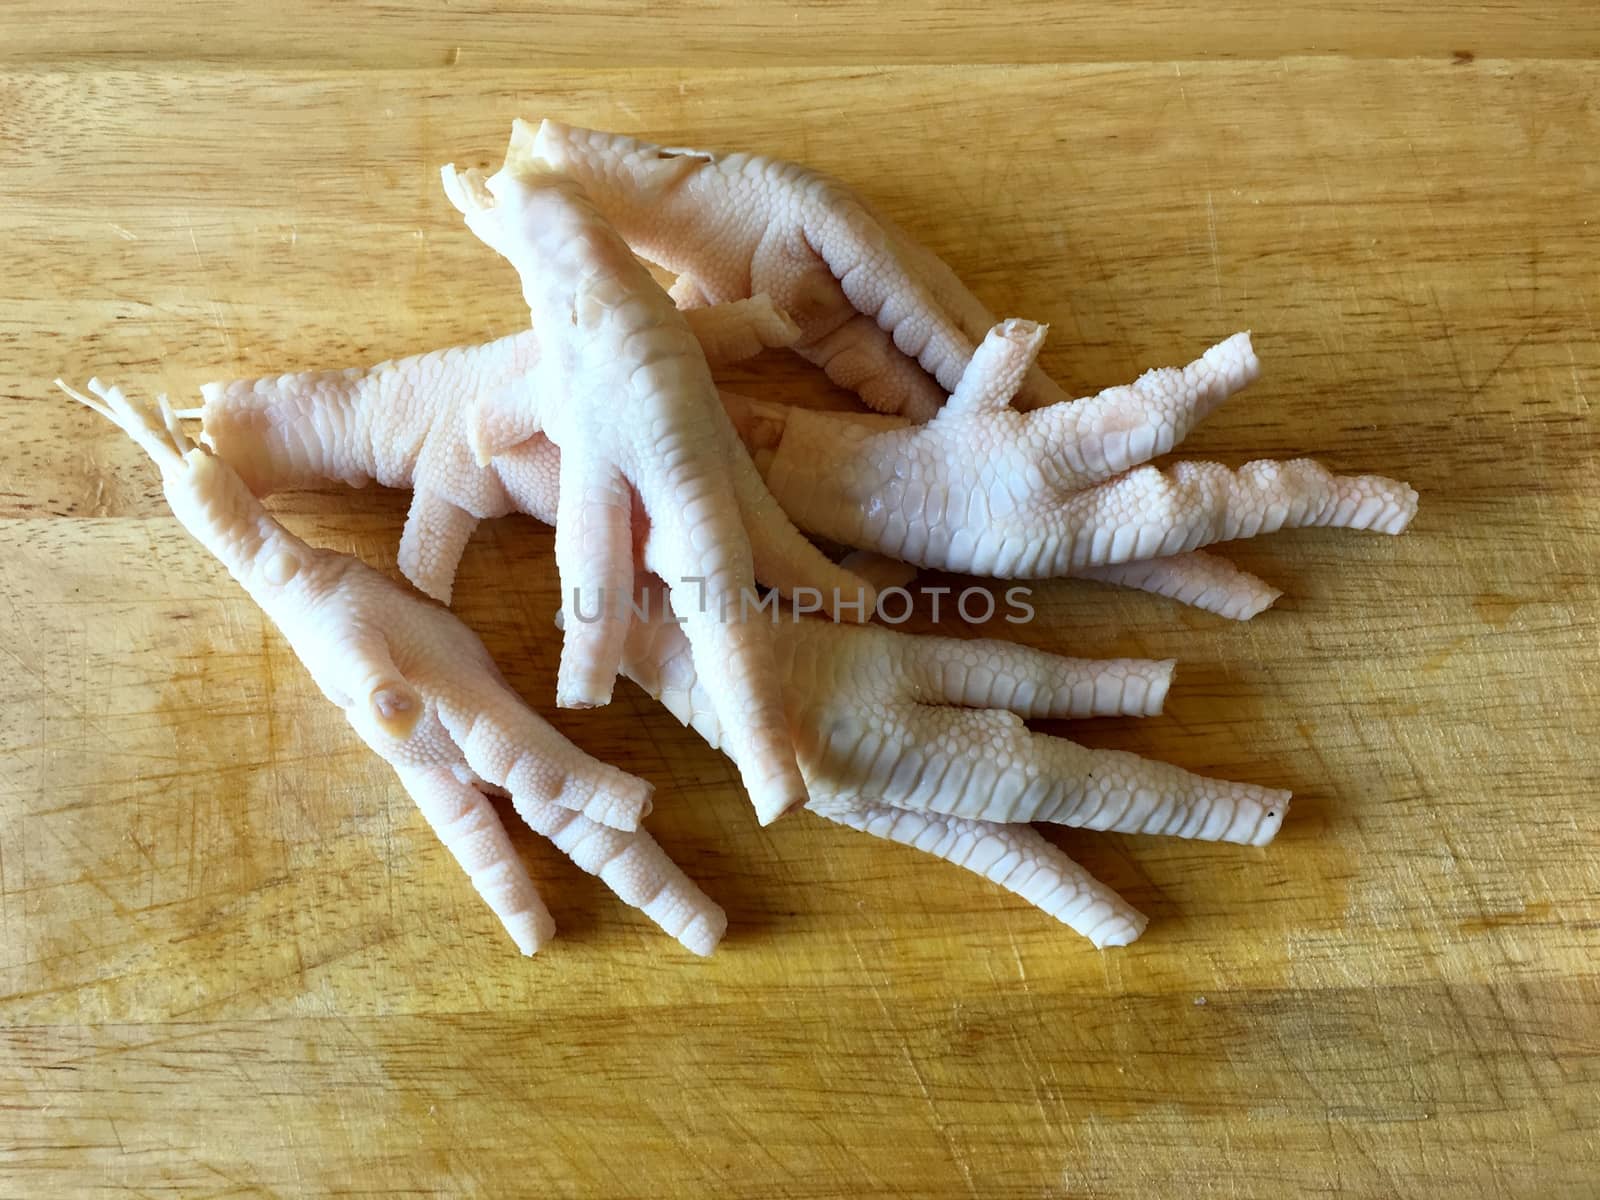 Chicken feet without toenails on a cutting board.